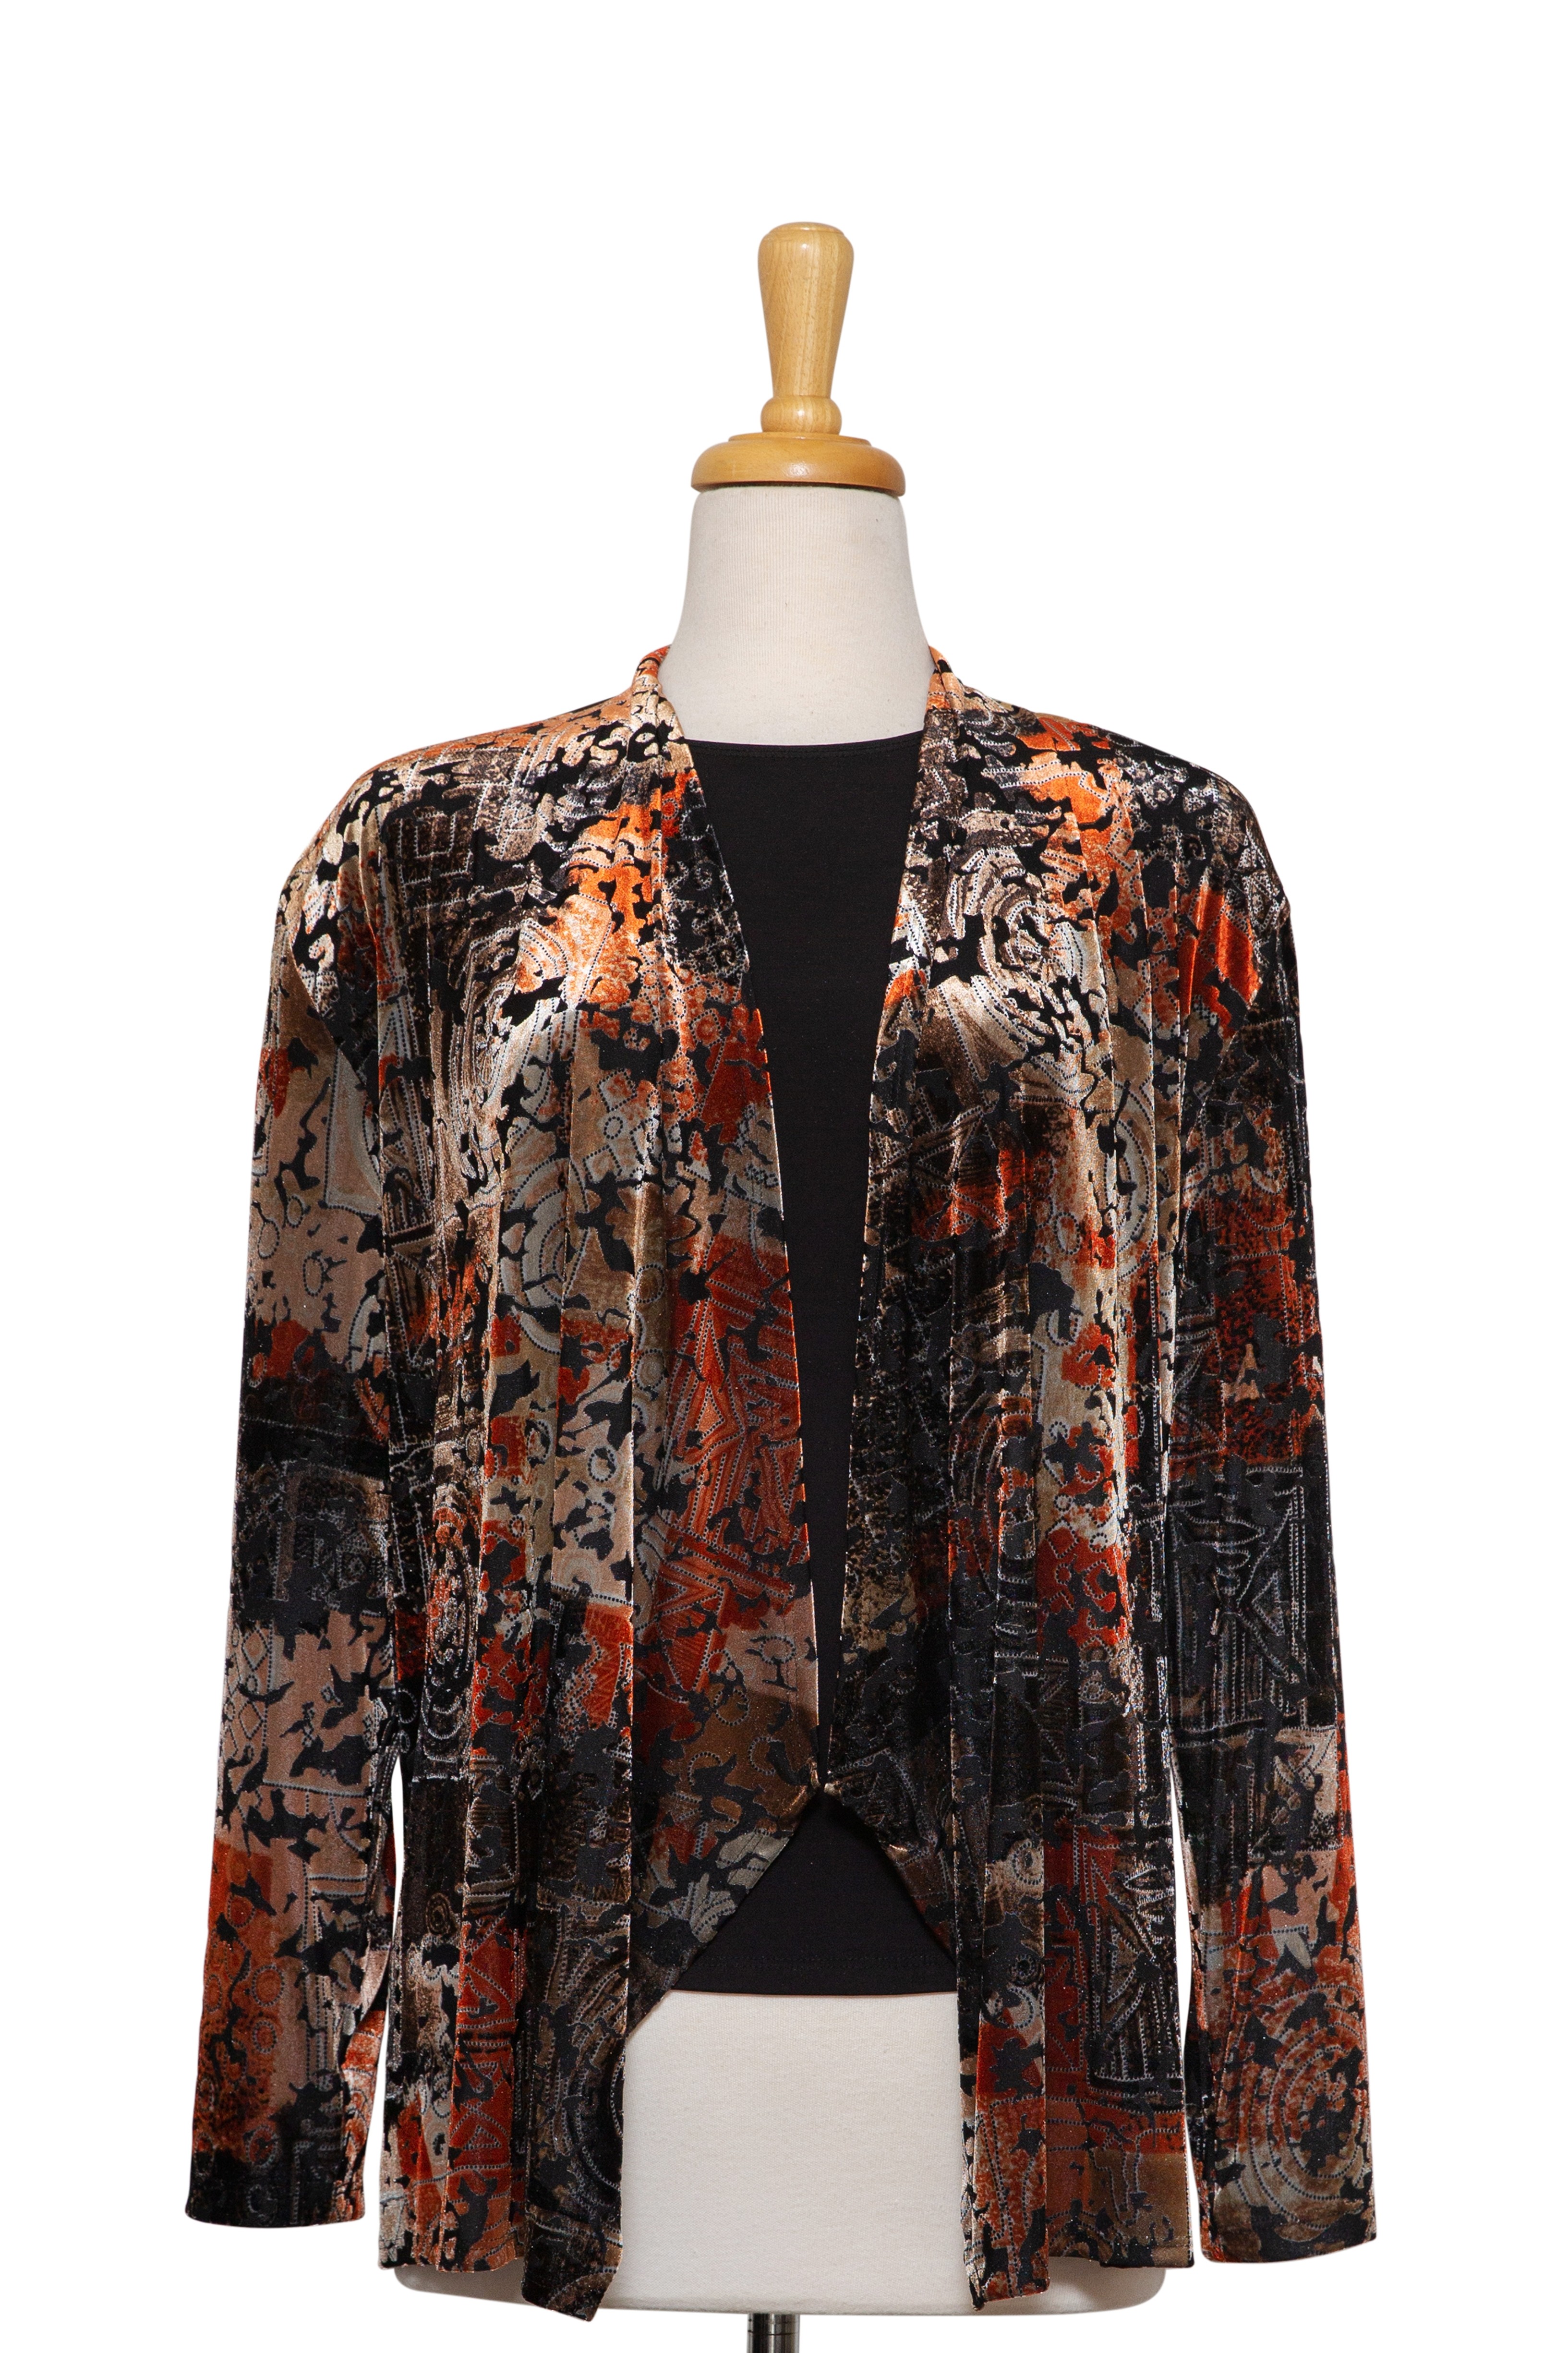  Two Piece Rust, Black and Taupe Cut Velvet Shawl Collar Jacket With Black Long Sleeve Microfiber Top